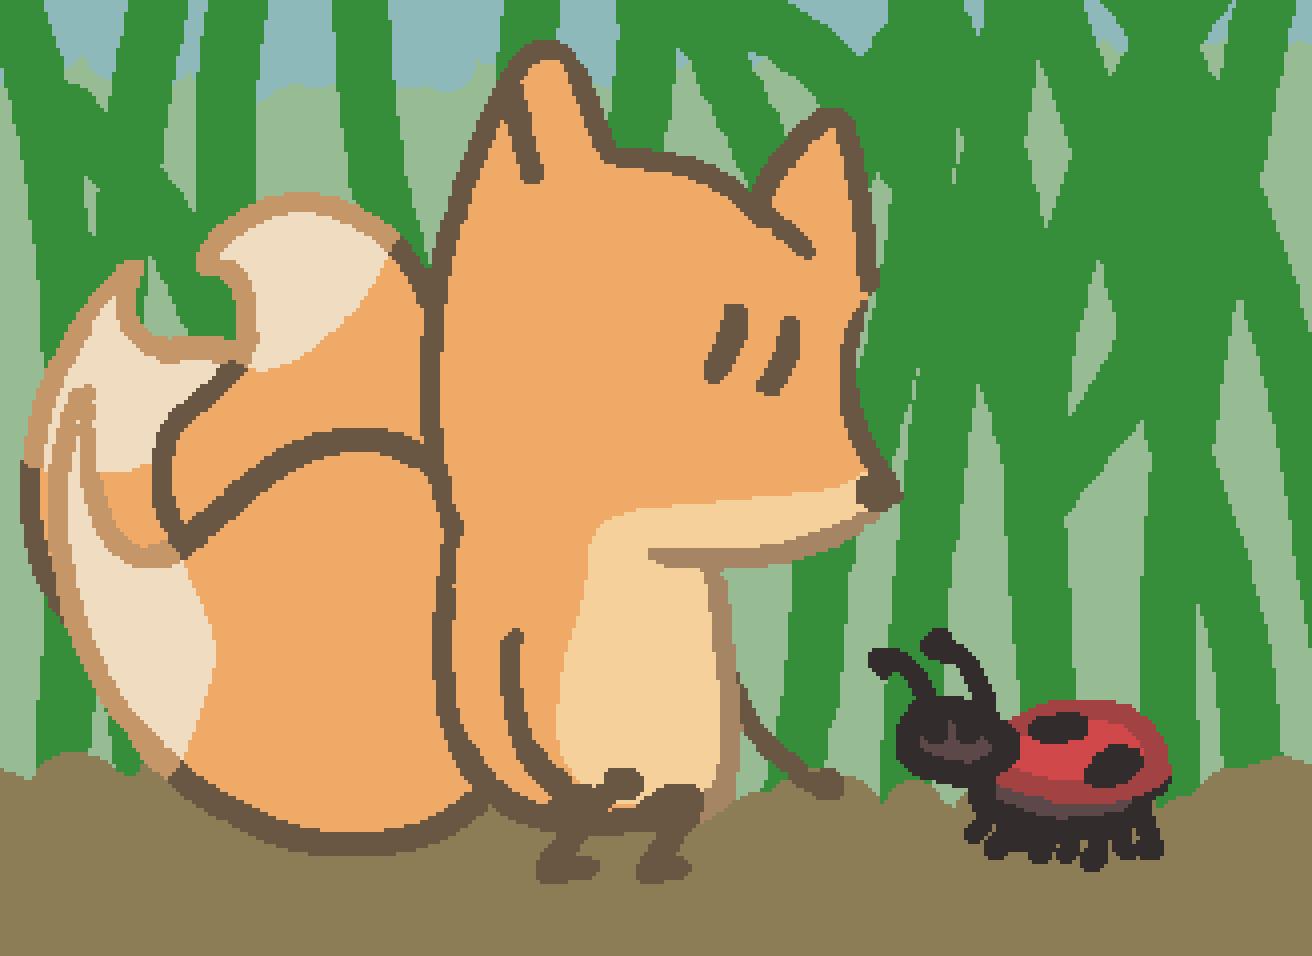 a tiny three tailed fox playing with a ladybug about the size of a puppy in comparison